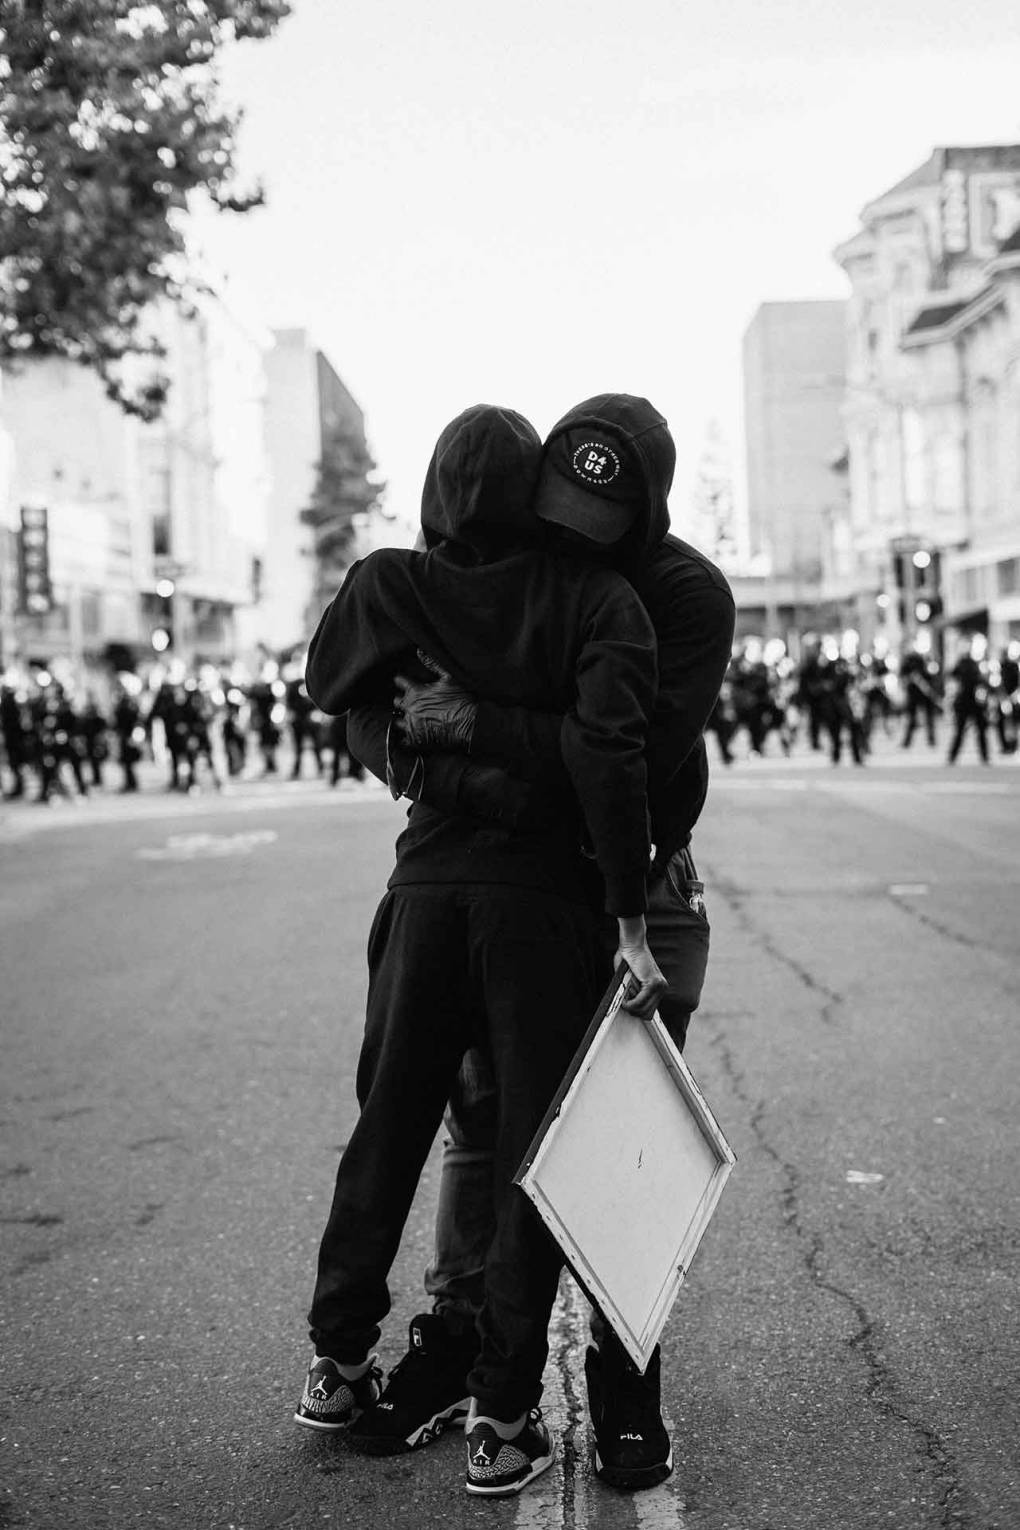 An embrace in the midst of chaos in downtown Oakland during protests in late May 2020.